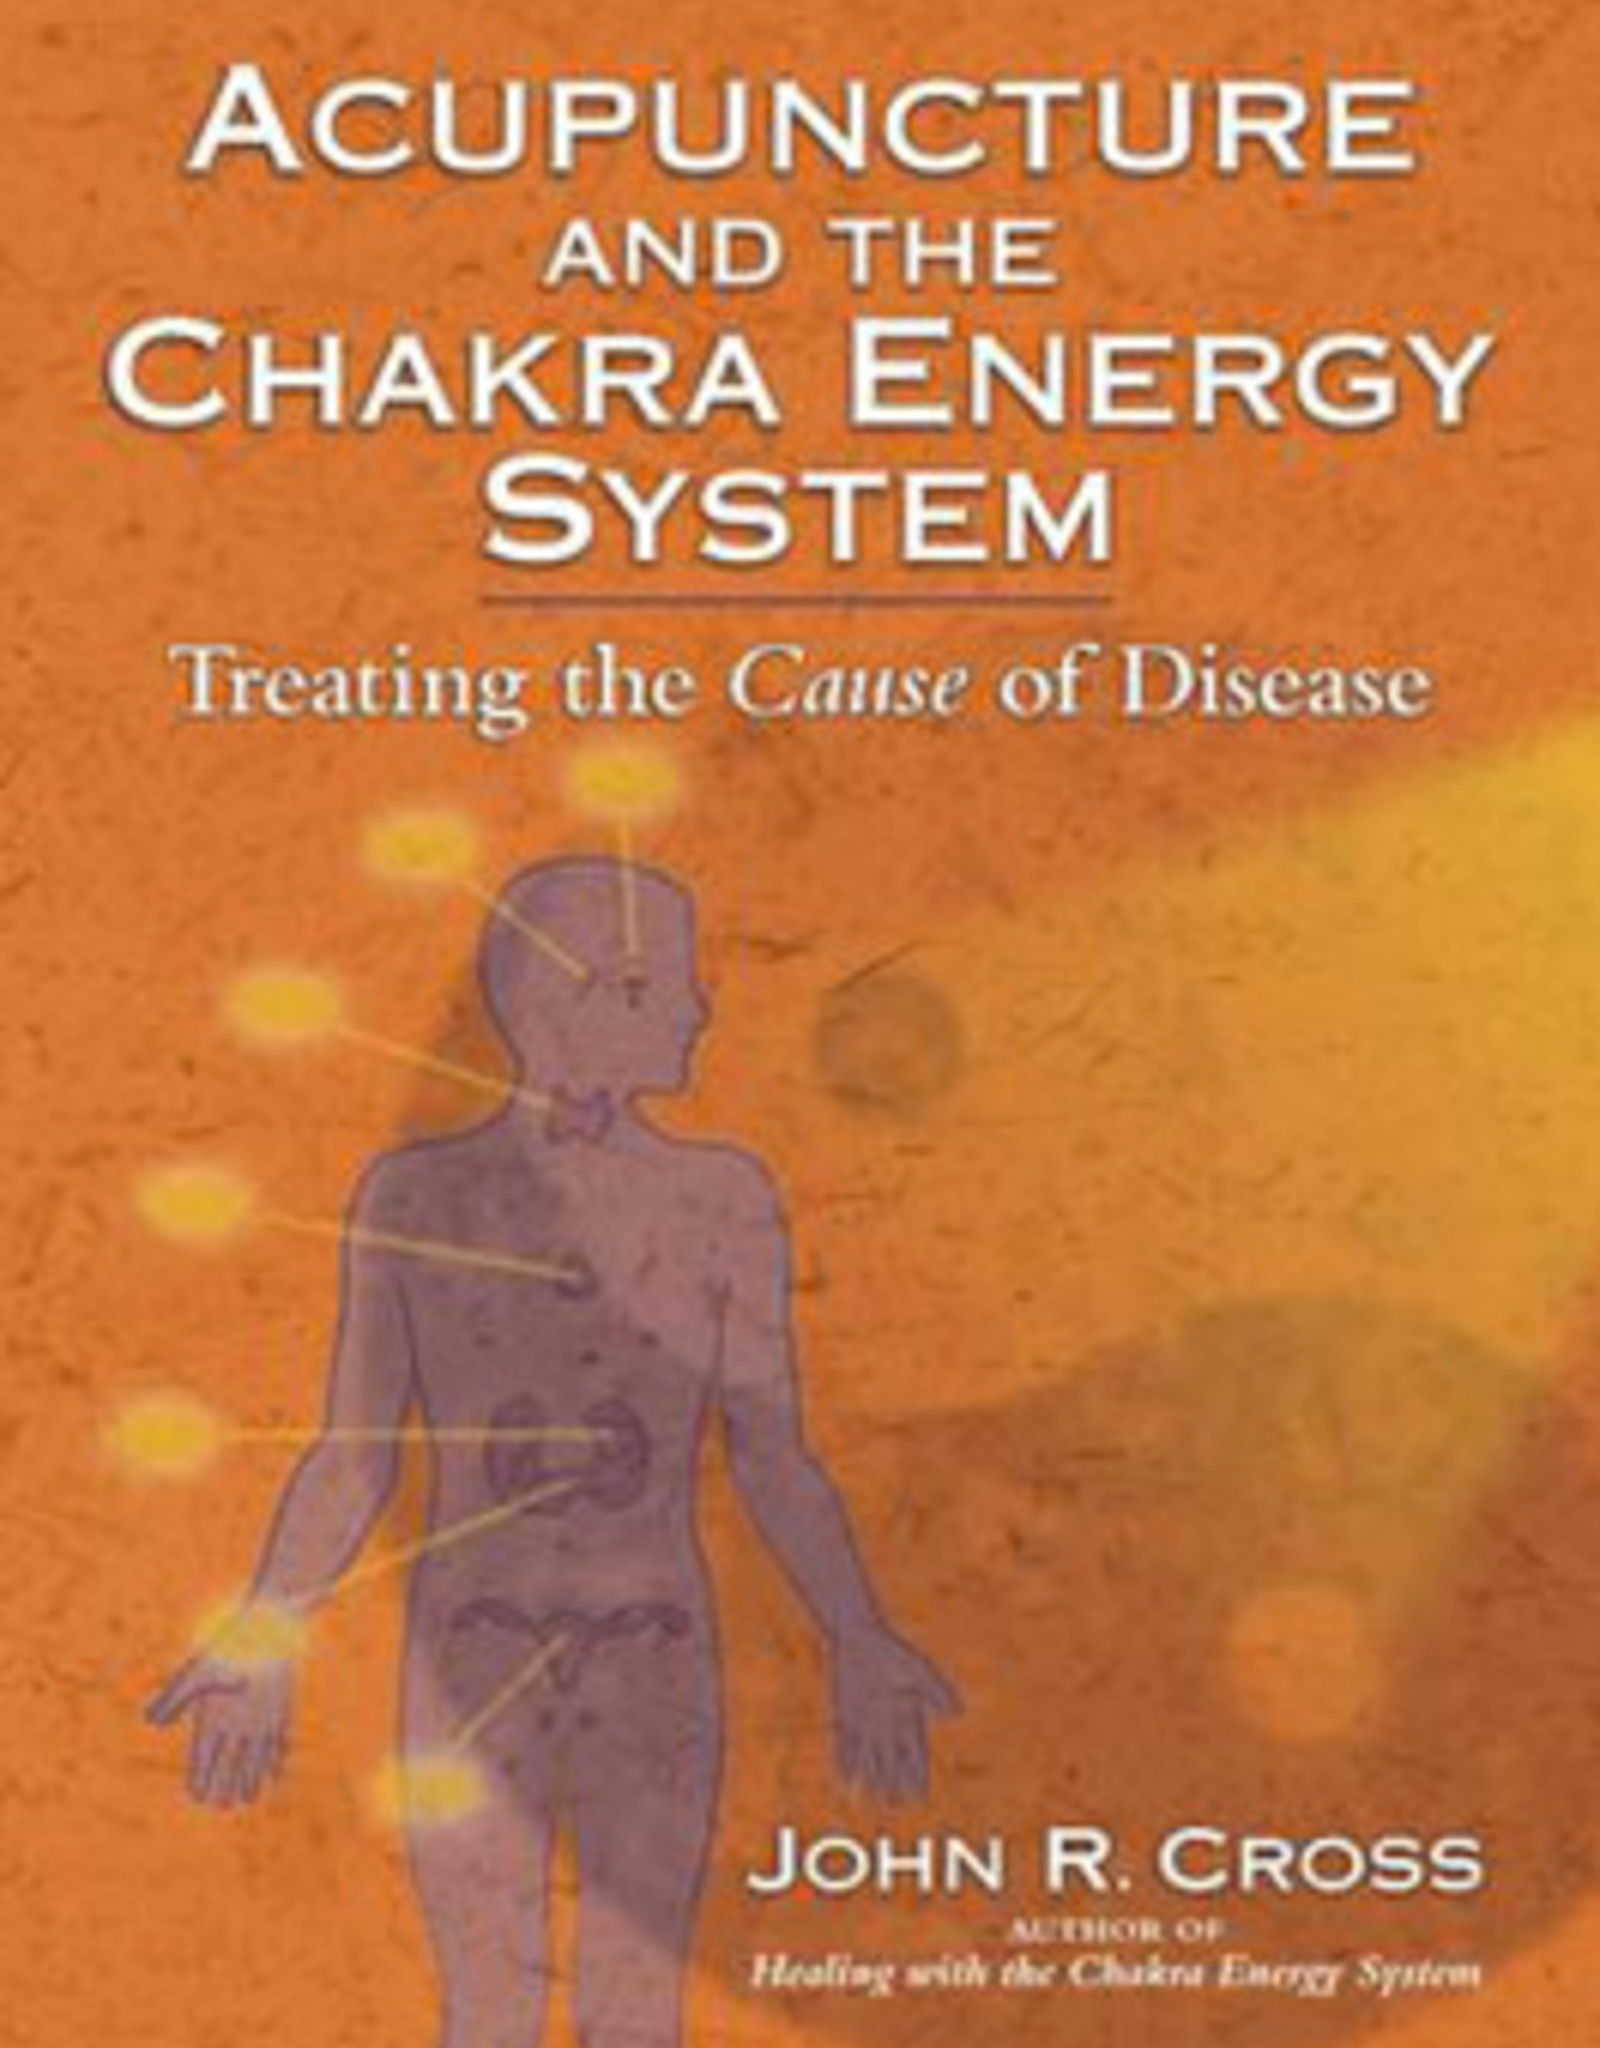 ACUPUNCTURE & CHAKRA ENERGY SYSTEM